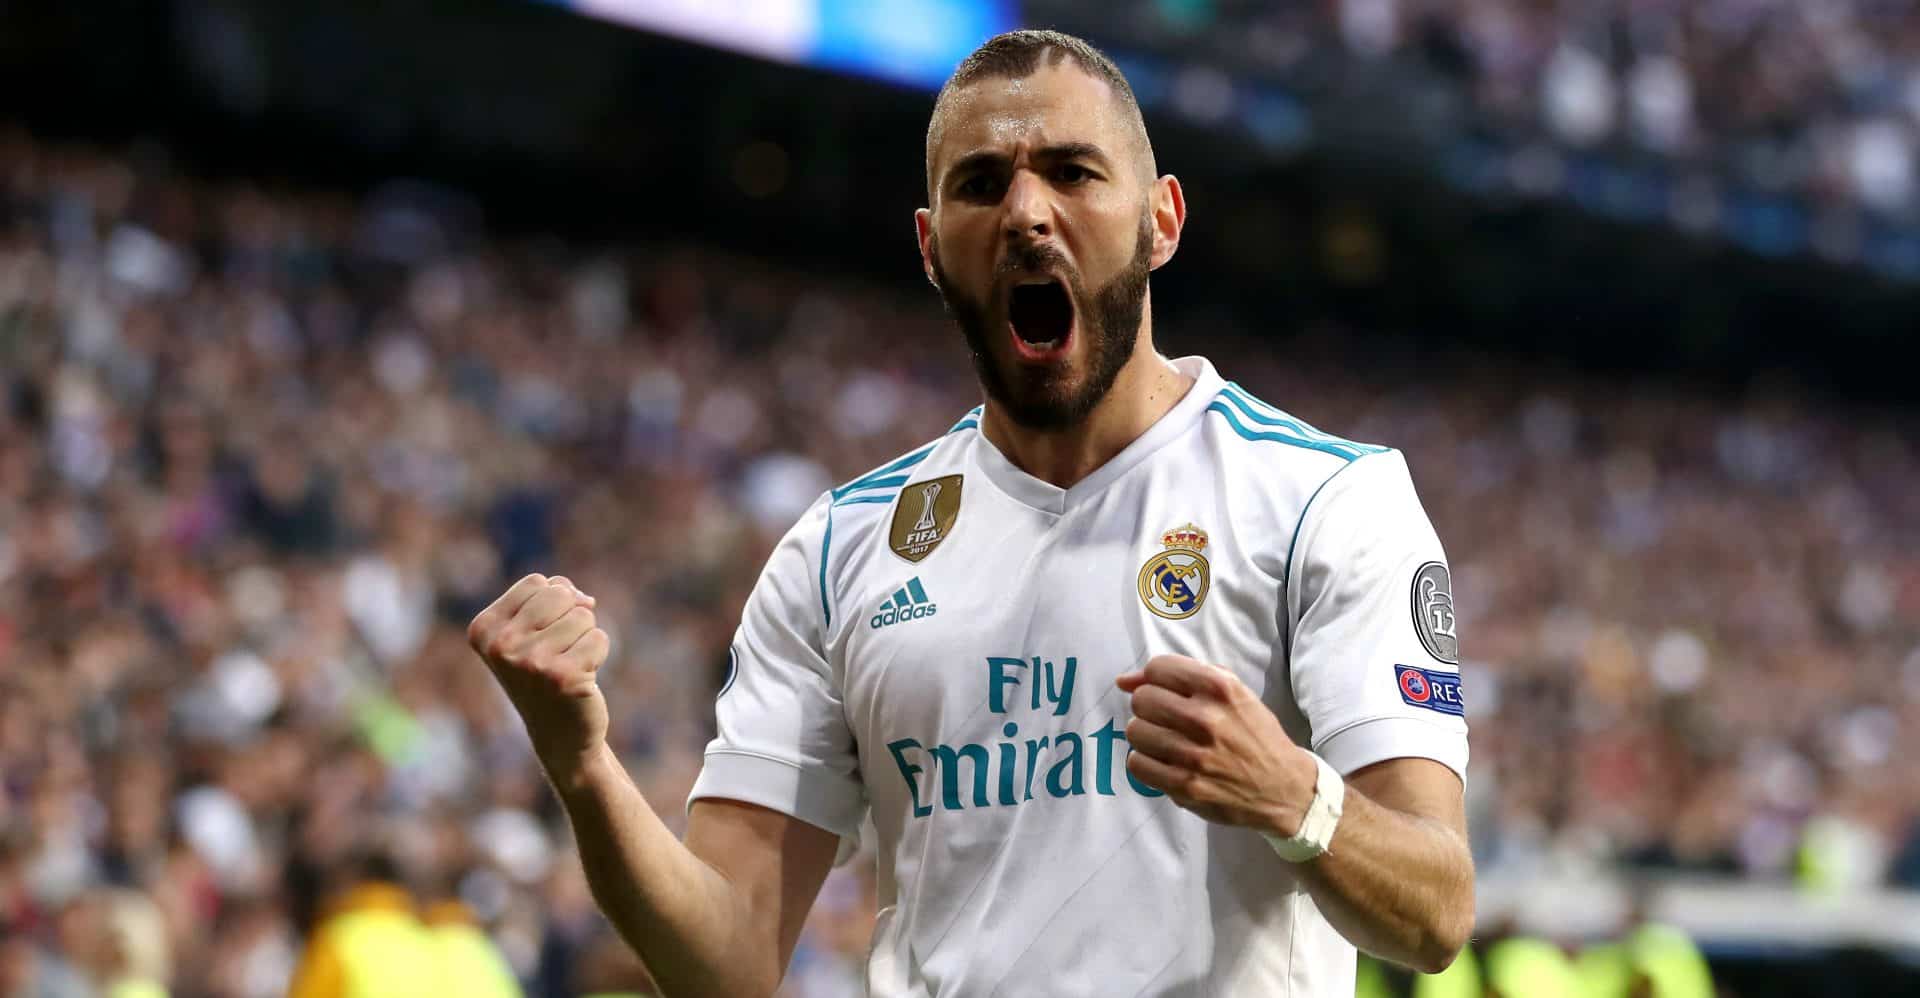 Karim Mostafa Benzema is a French professional footballer who plays as a striker for Spanish club Real Madrid and the France national team.